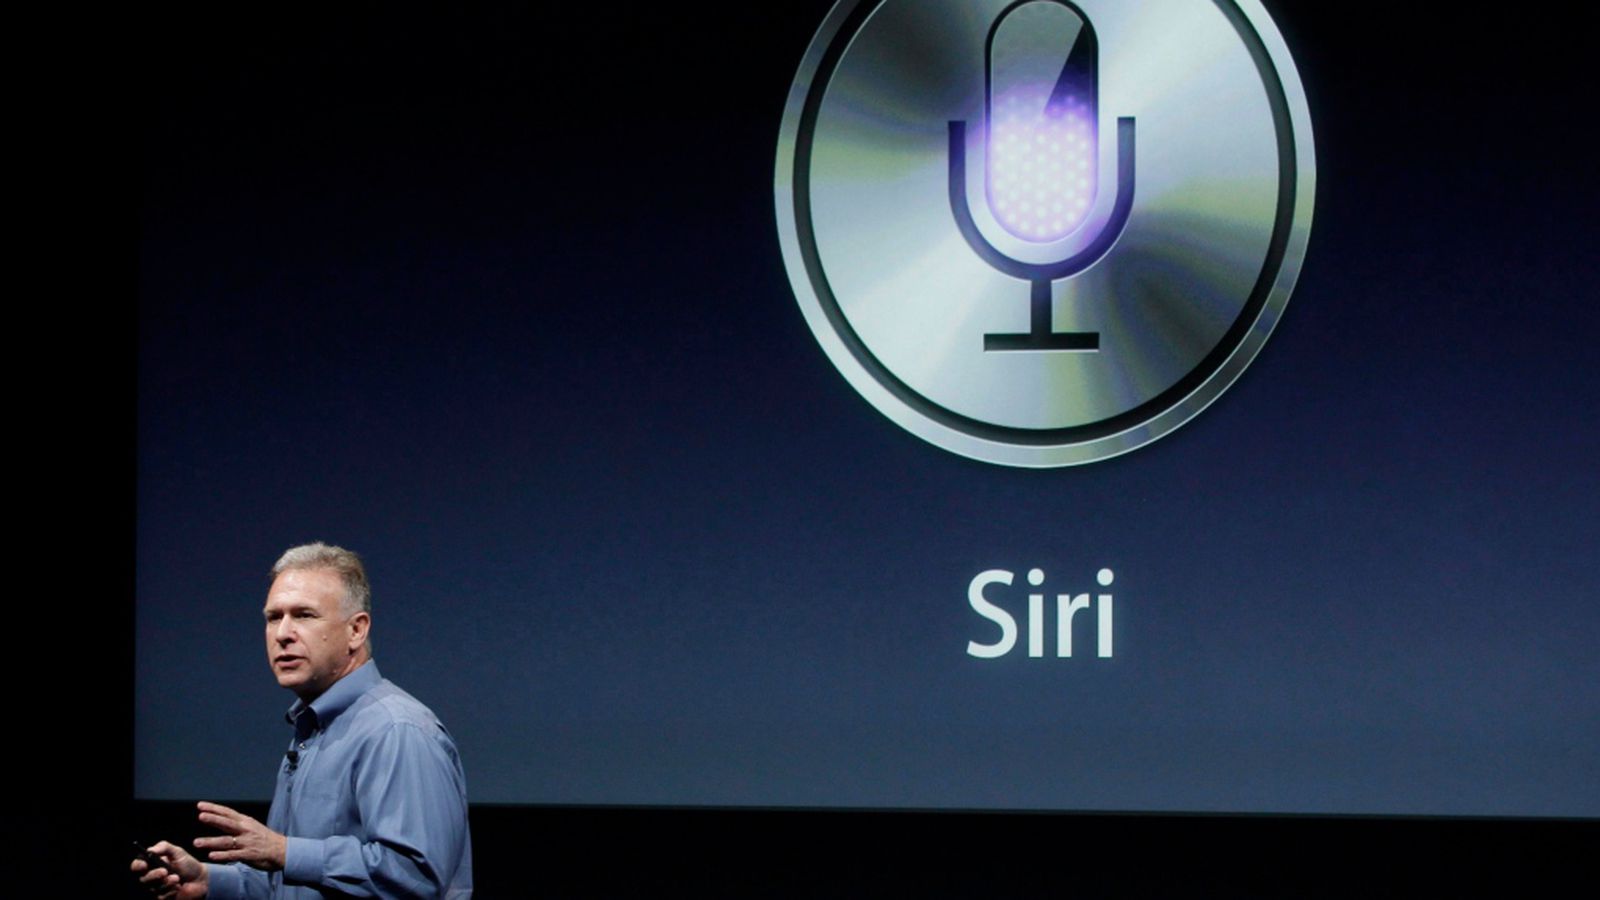 Today Marks the 10th Anniversary of Apple Introducing the iPhone 4S With Siri